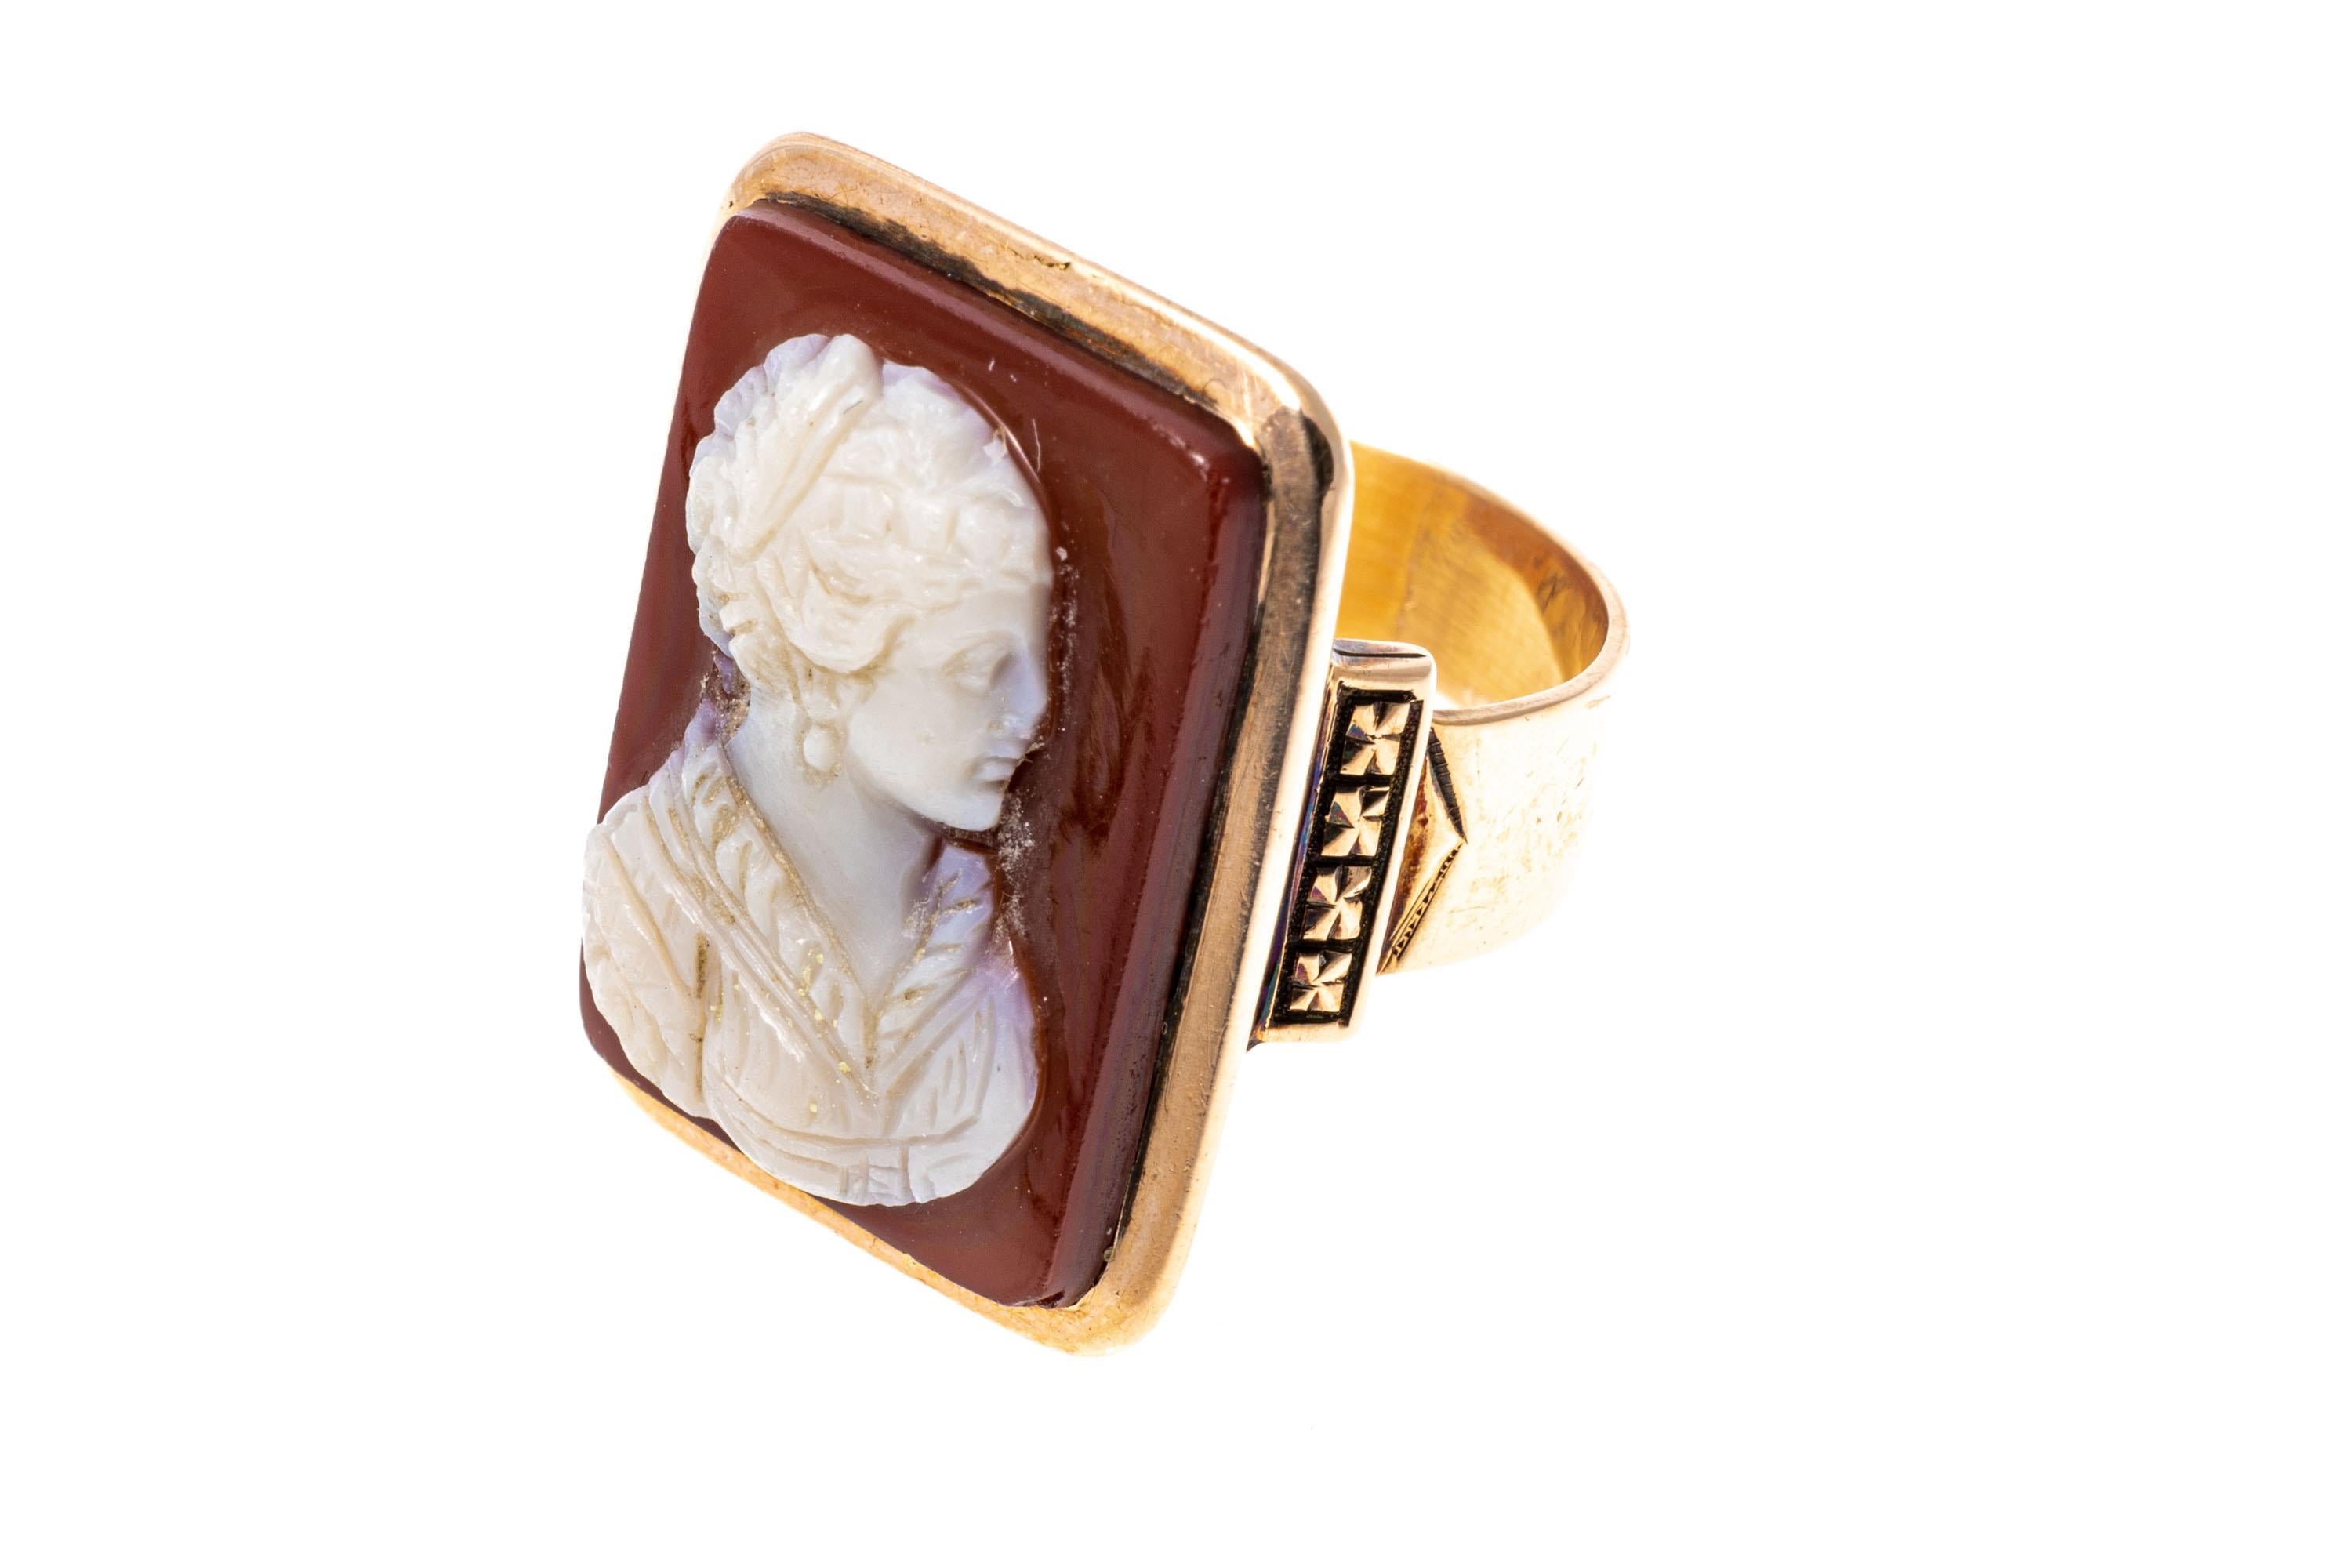 12k Gold Antique Rectangular Cameo Ring, Right Facing Bust For Sale 1